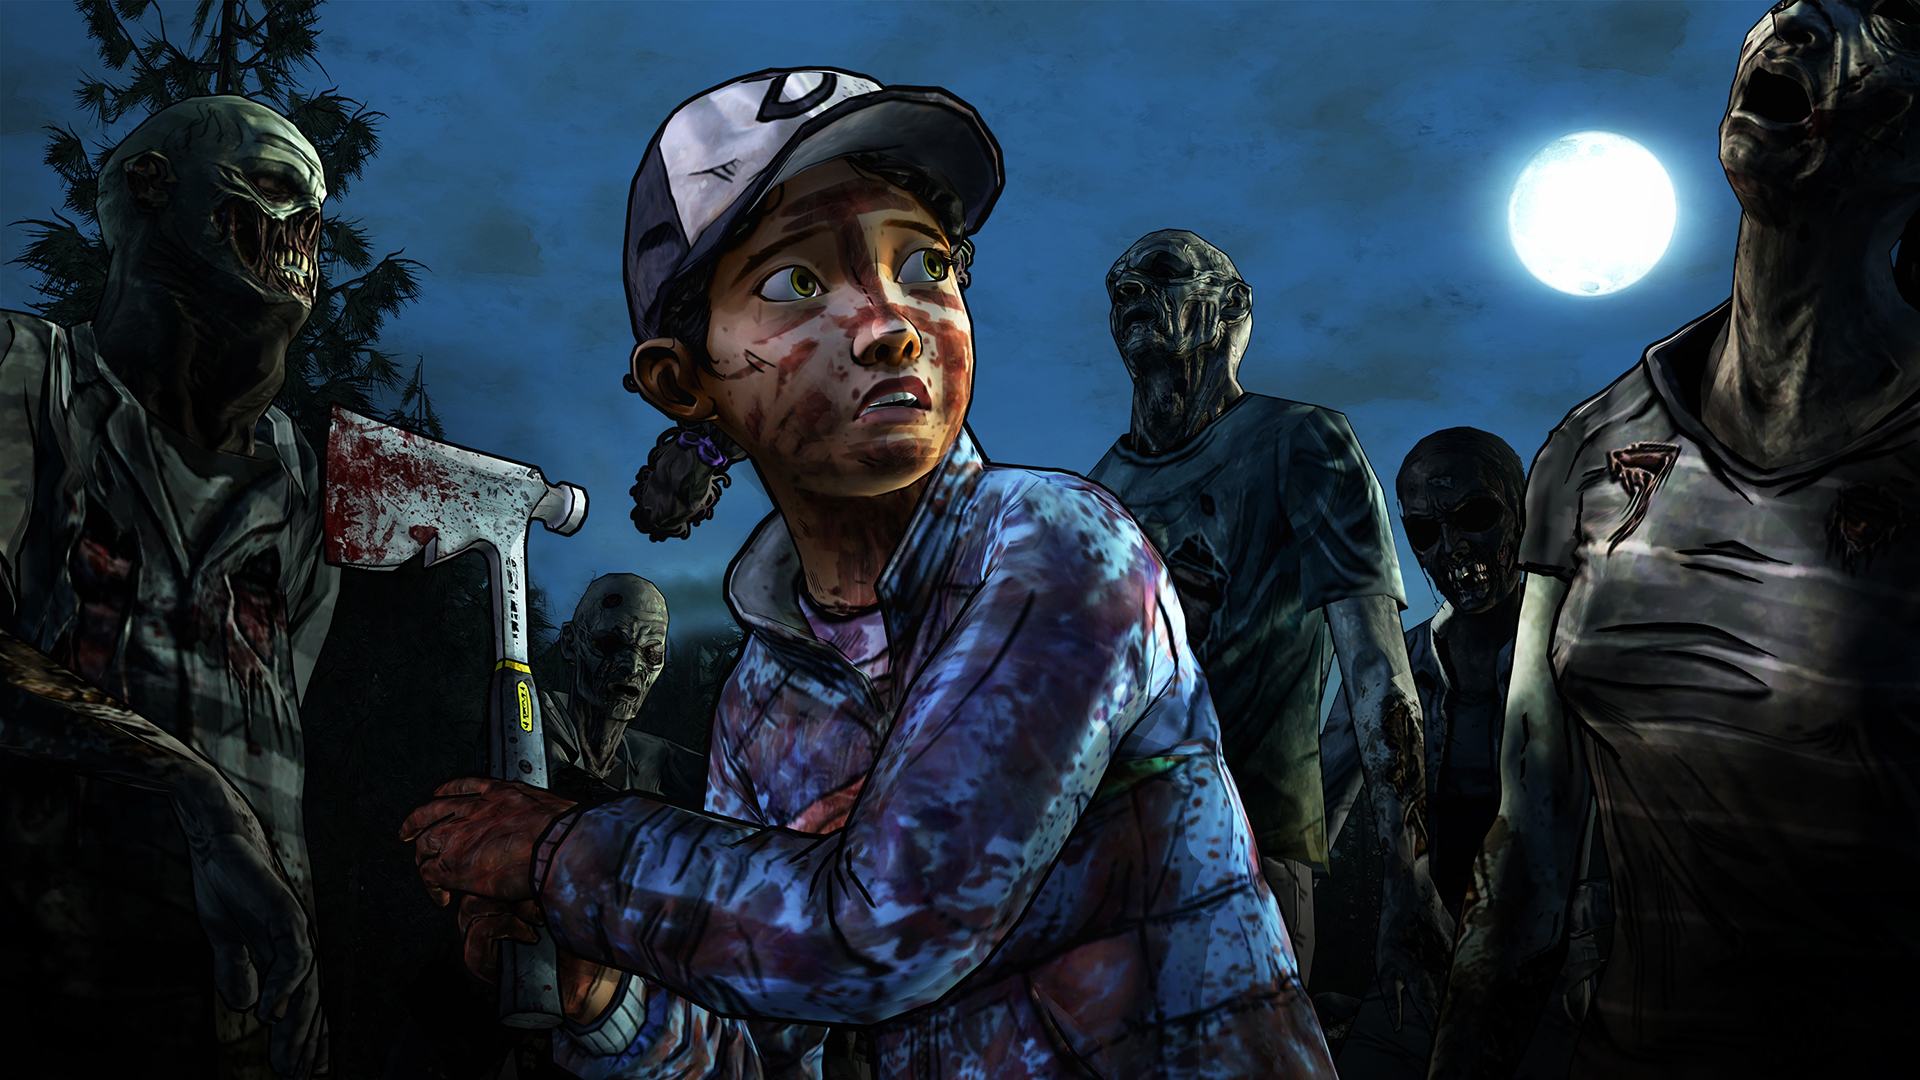 The Walking Dead Season 2: Amid the Ruins set to release July 23